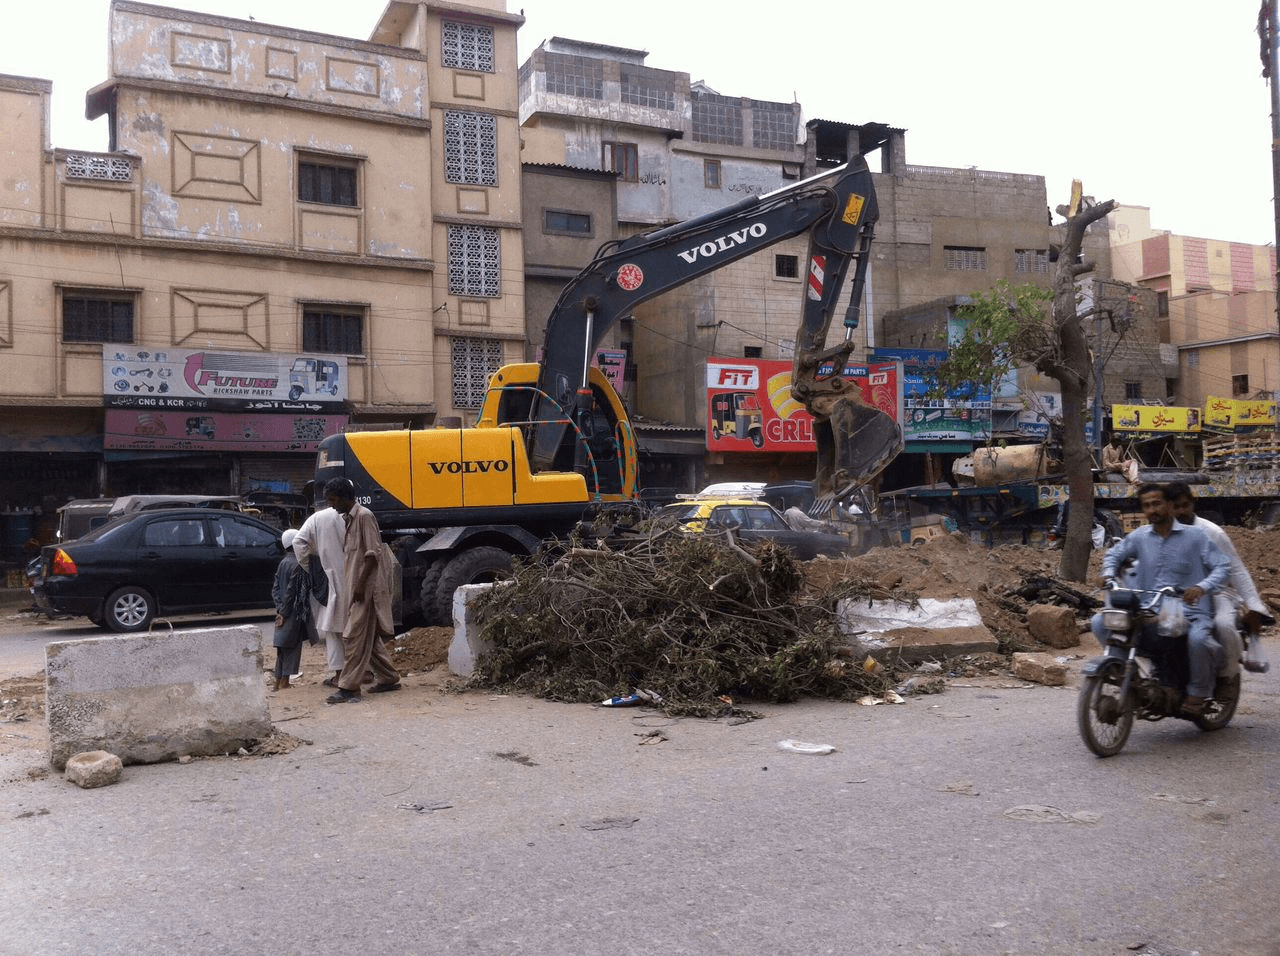 Trees are being cut down to make way for new bus service in Karachi, ironically named the Green Line